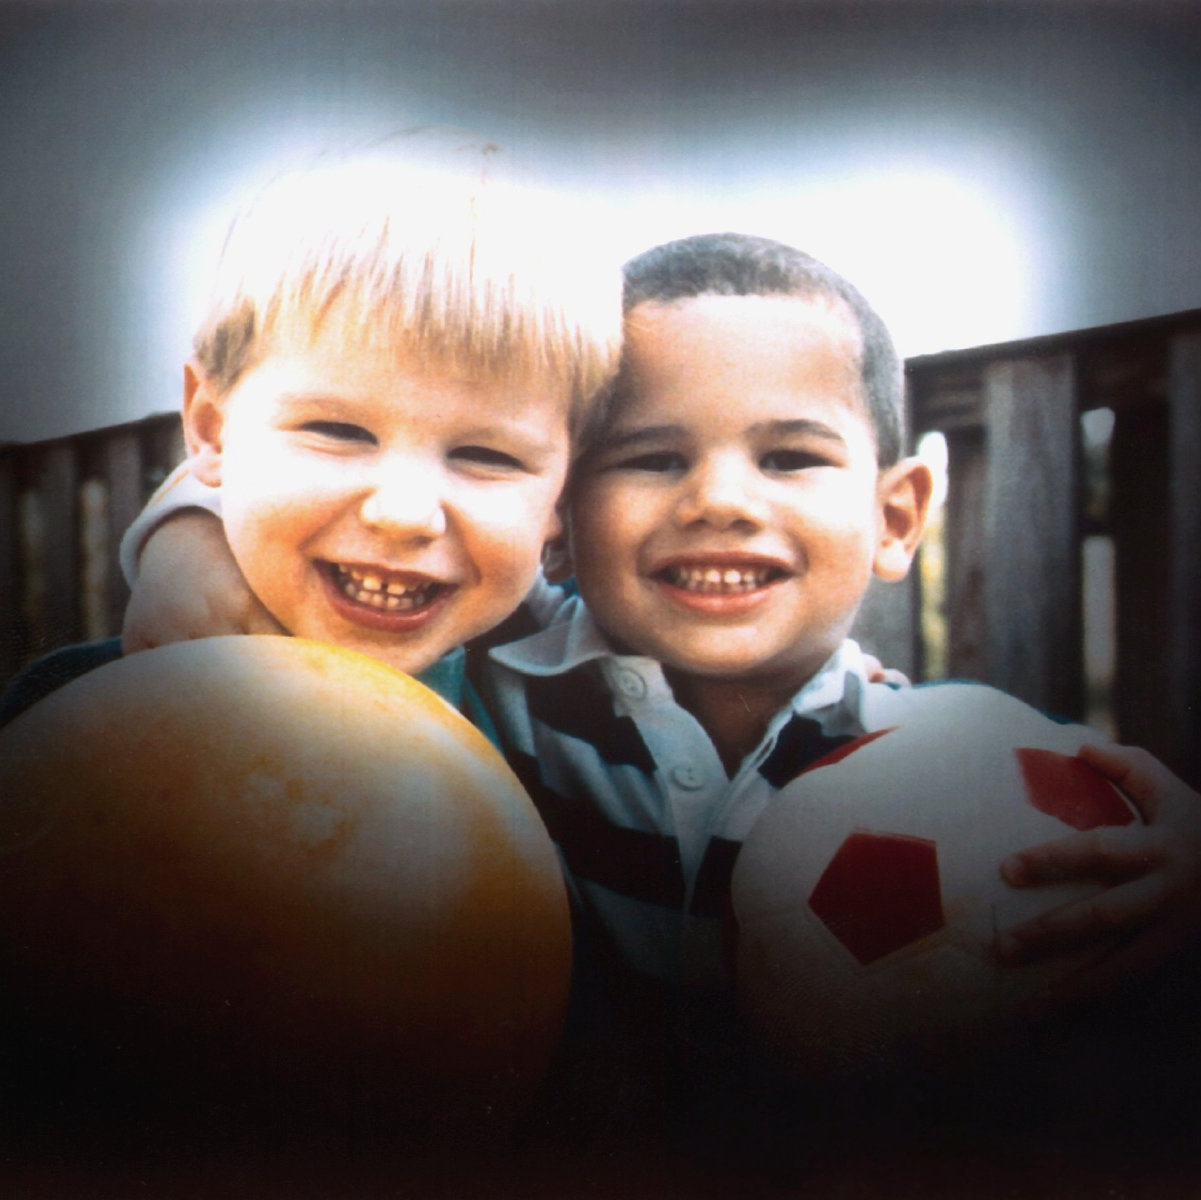 Slightly blurred image of two kids with rubber balls